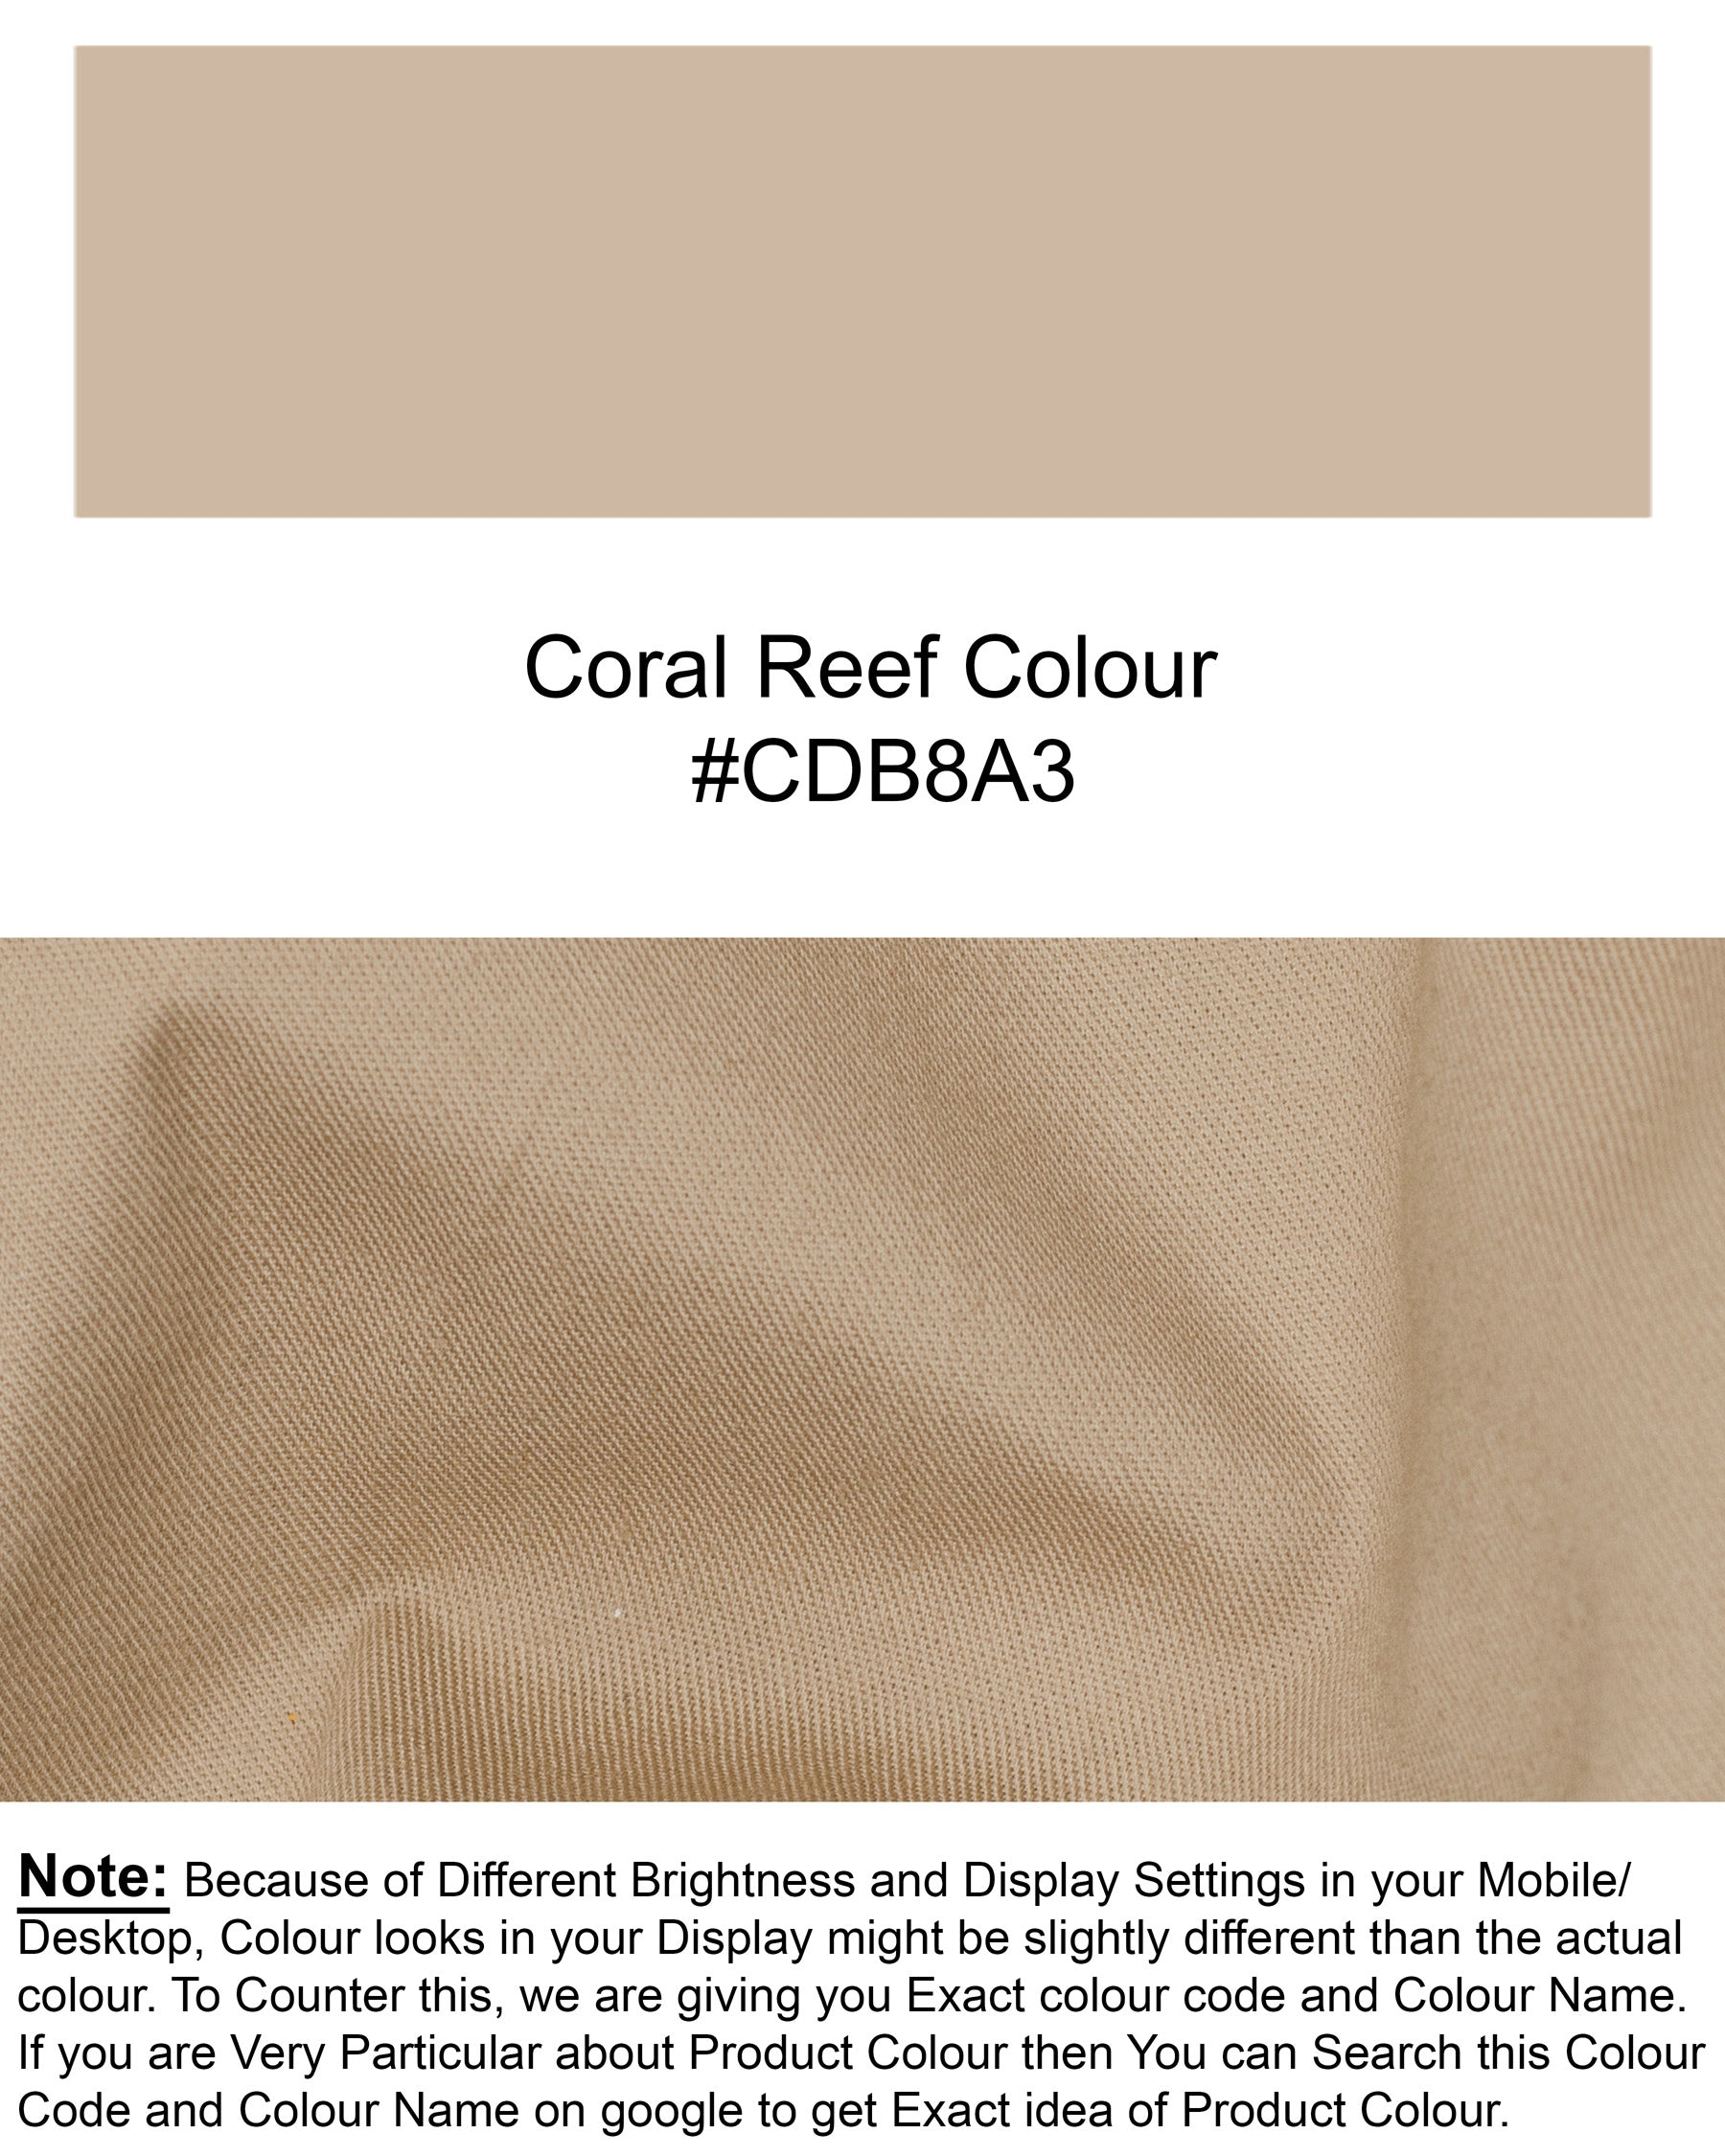 Coral Reef DouSTe Breasted Wool Rich Suit sST1324-DB-36, ST1324-DB-38, ST1324-DB-40, ST1324-DB-42, ST1324-DB-44, ST1324-DB-46, ST1324-DB-48, ST1324-DB-50, ST1324-DB-52, ST1324-DB-54, ST1324-DB-56, ST1324-DB-58, ST1324-DB-60